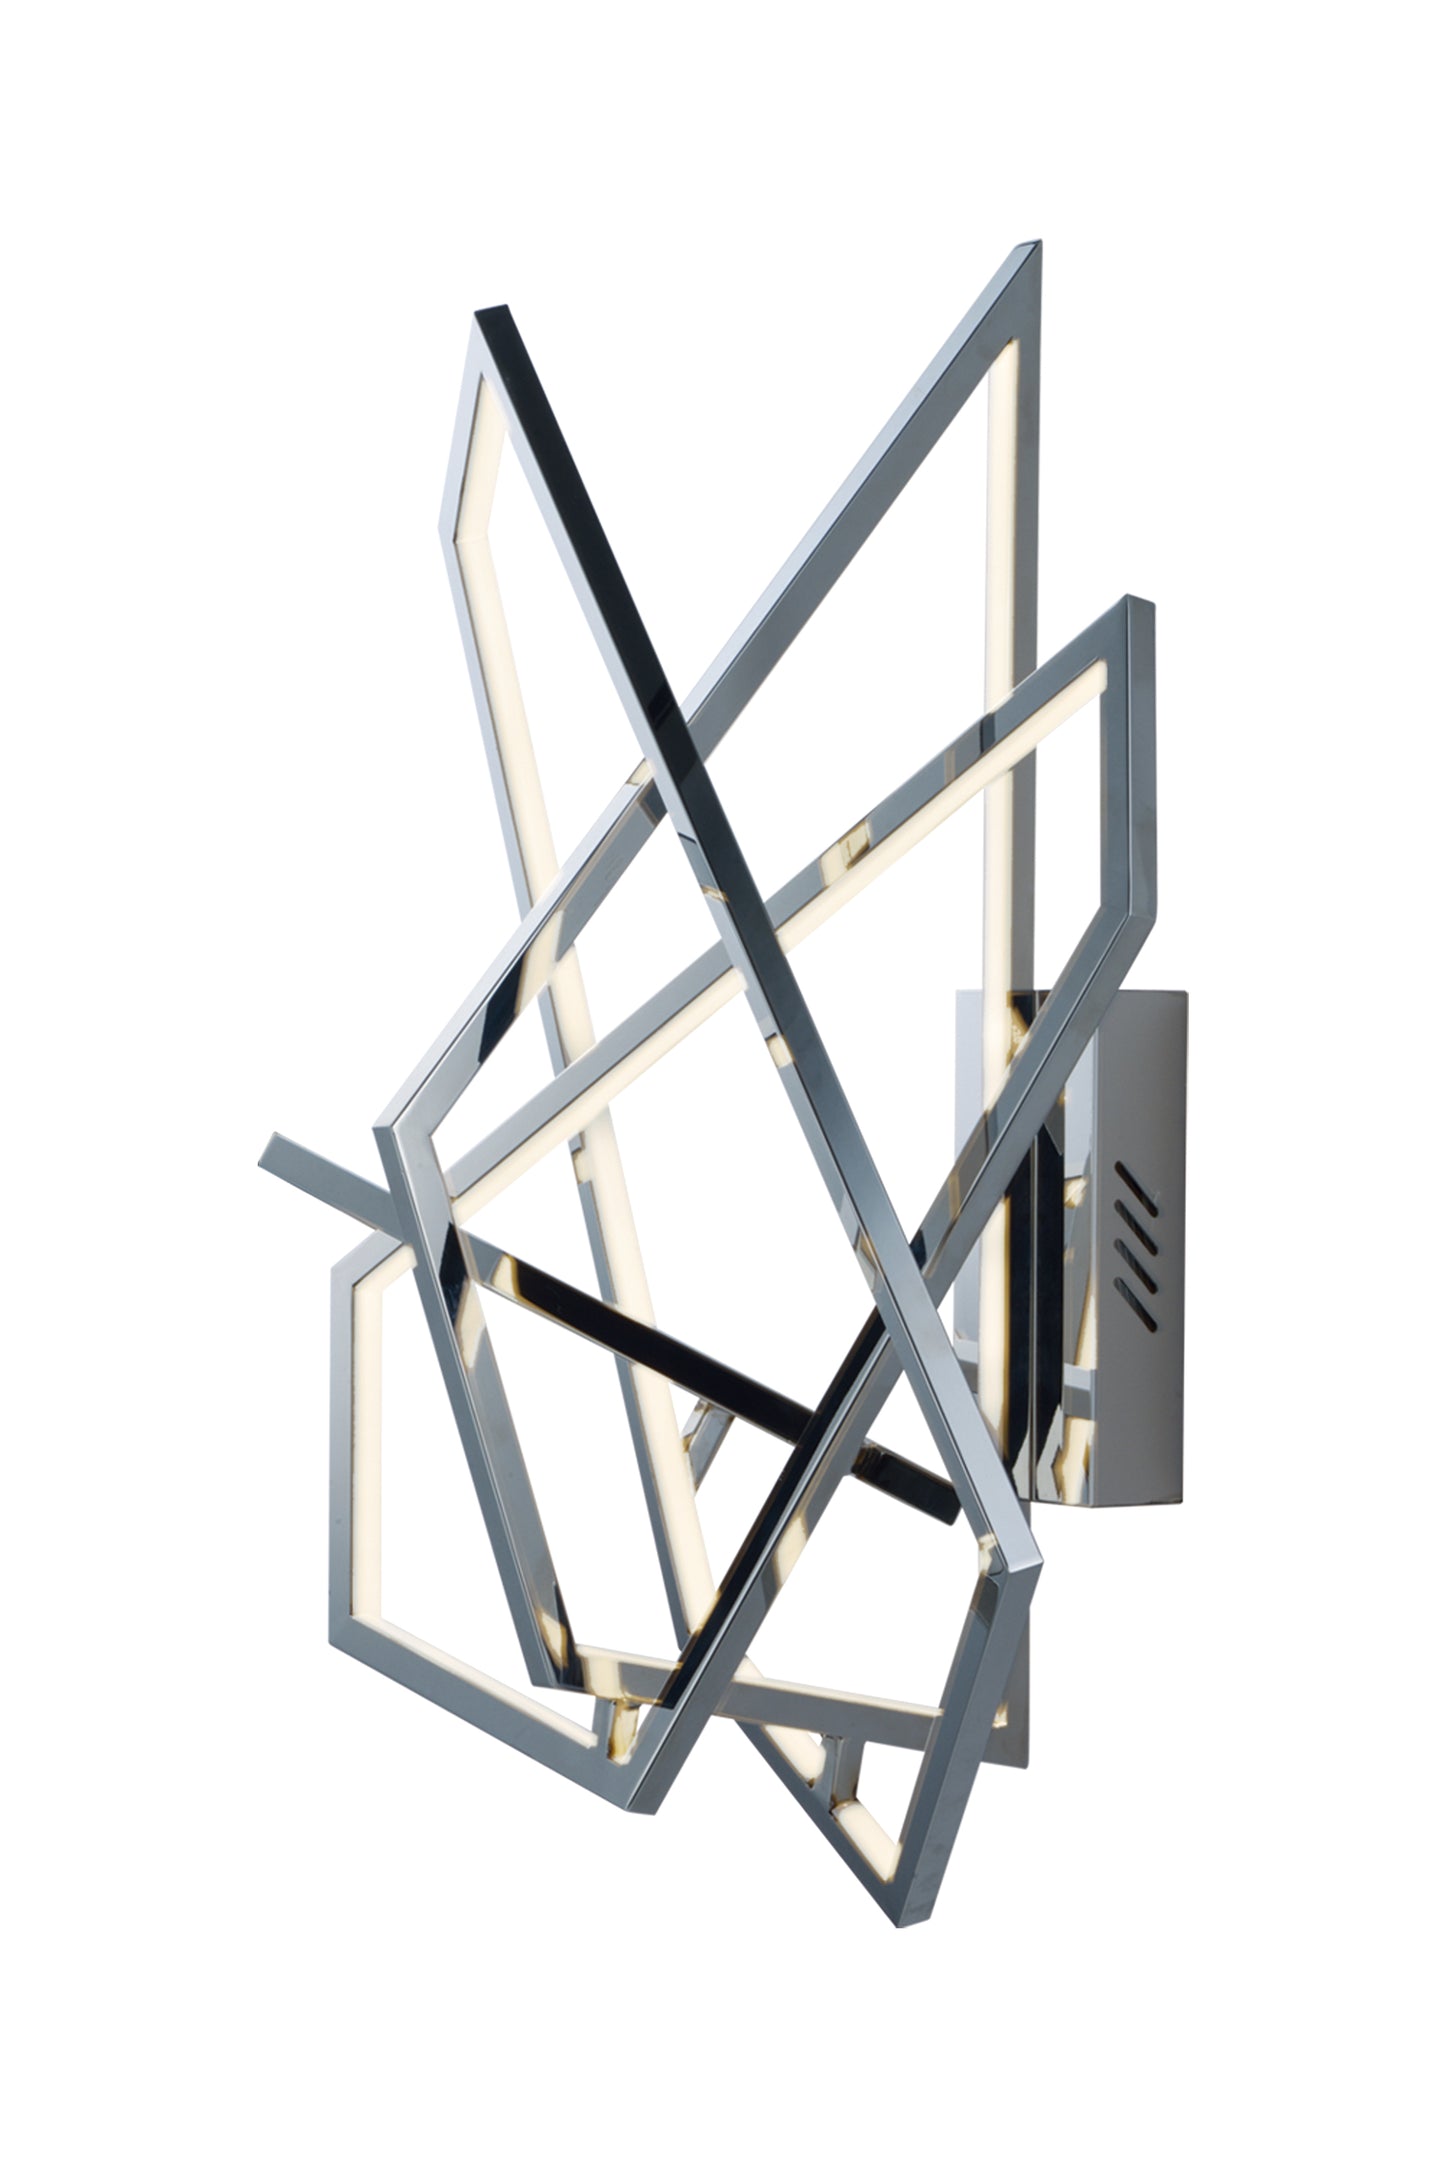 ET2 Trapezoid LED Wall Sconce